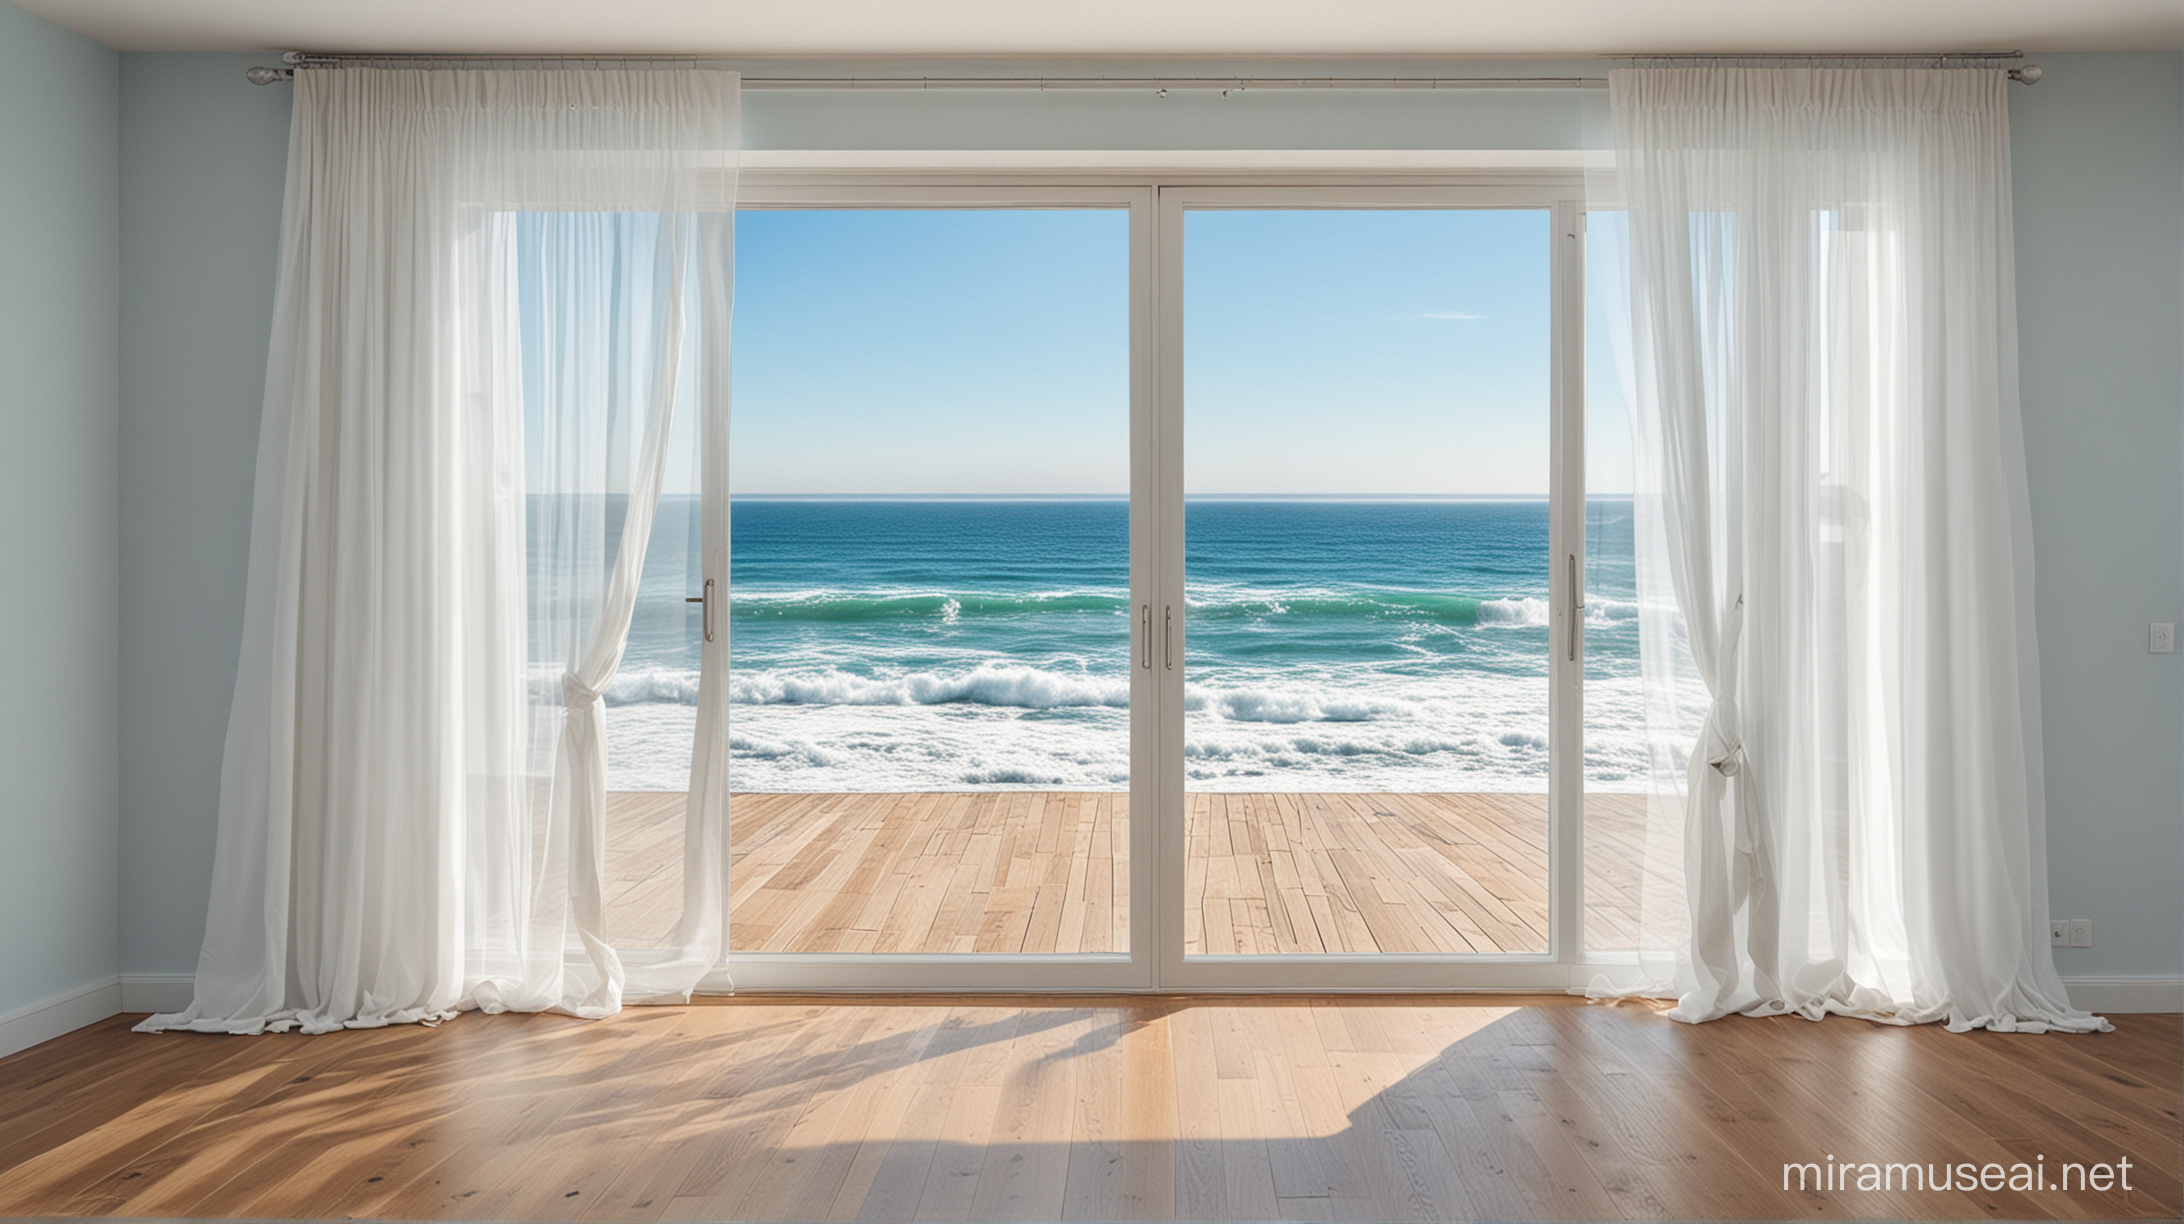 Tranquil Coastal Scene with Billowing White Curtains and Ocean View